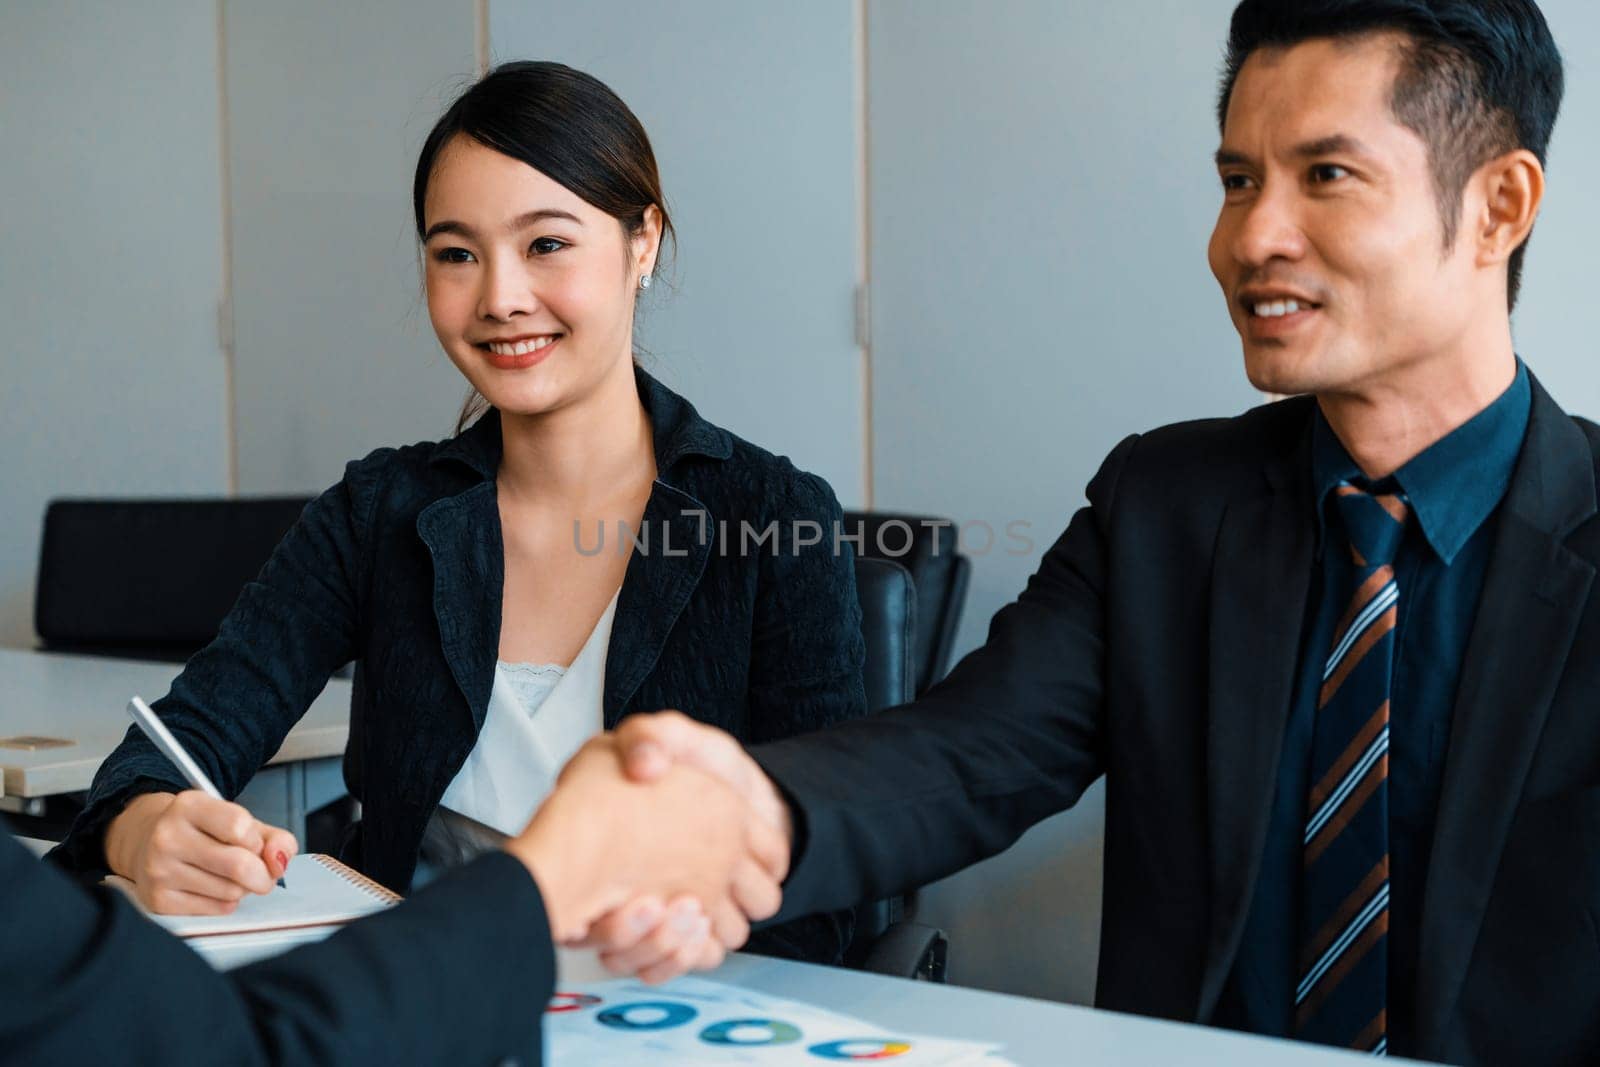 Business people agreement concept. Asian Businessman do handshake with another businessman in the office meeting room. Young Asian secretary lady sits beside him. uds